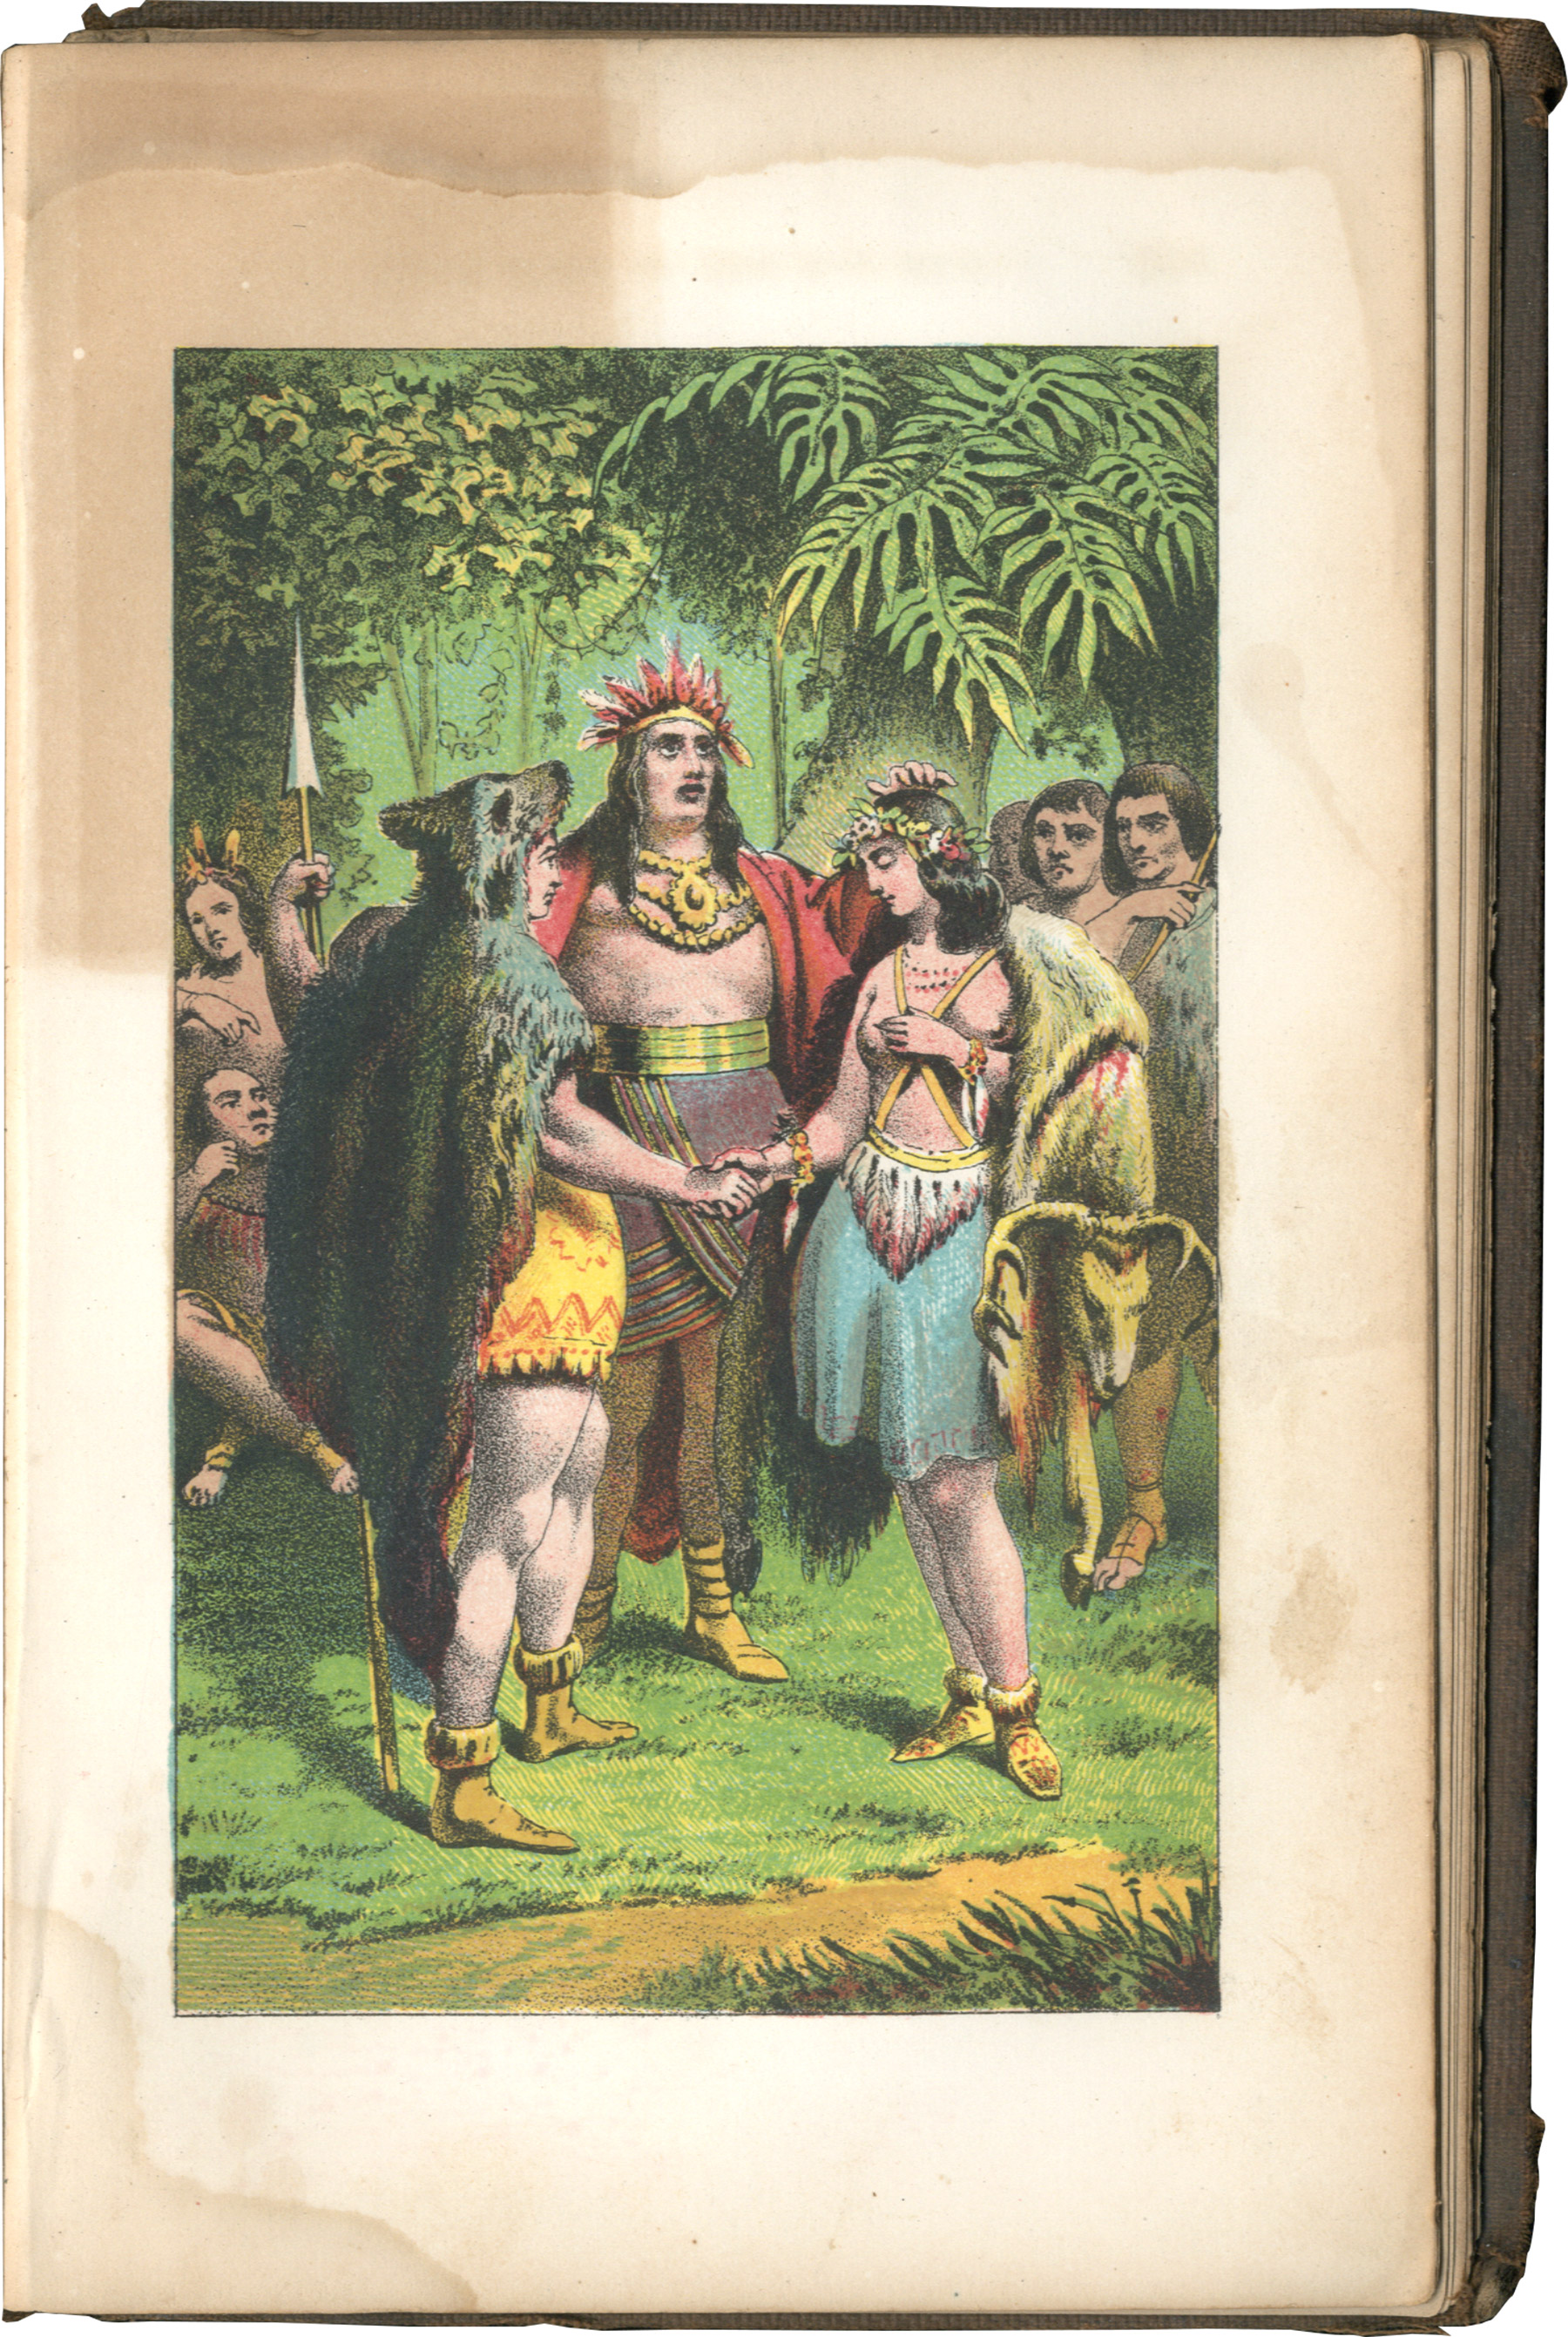 Illustration featuring various figures in Native American "dress"